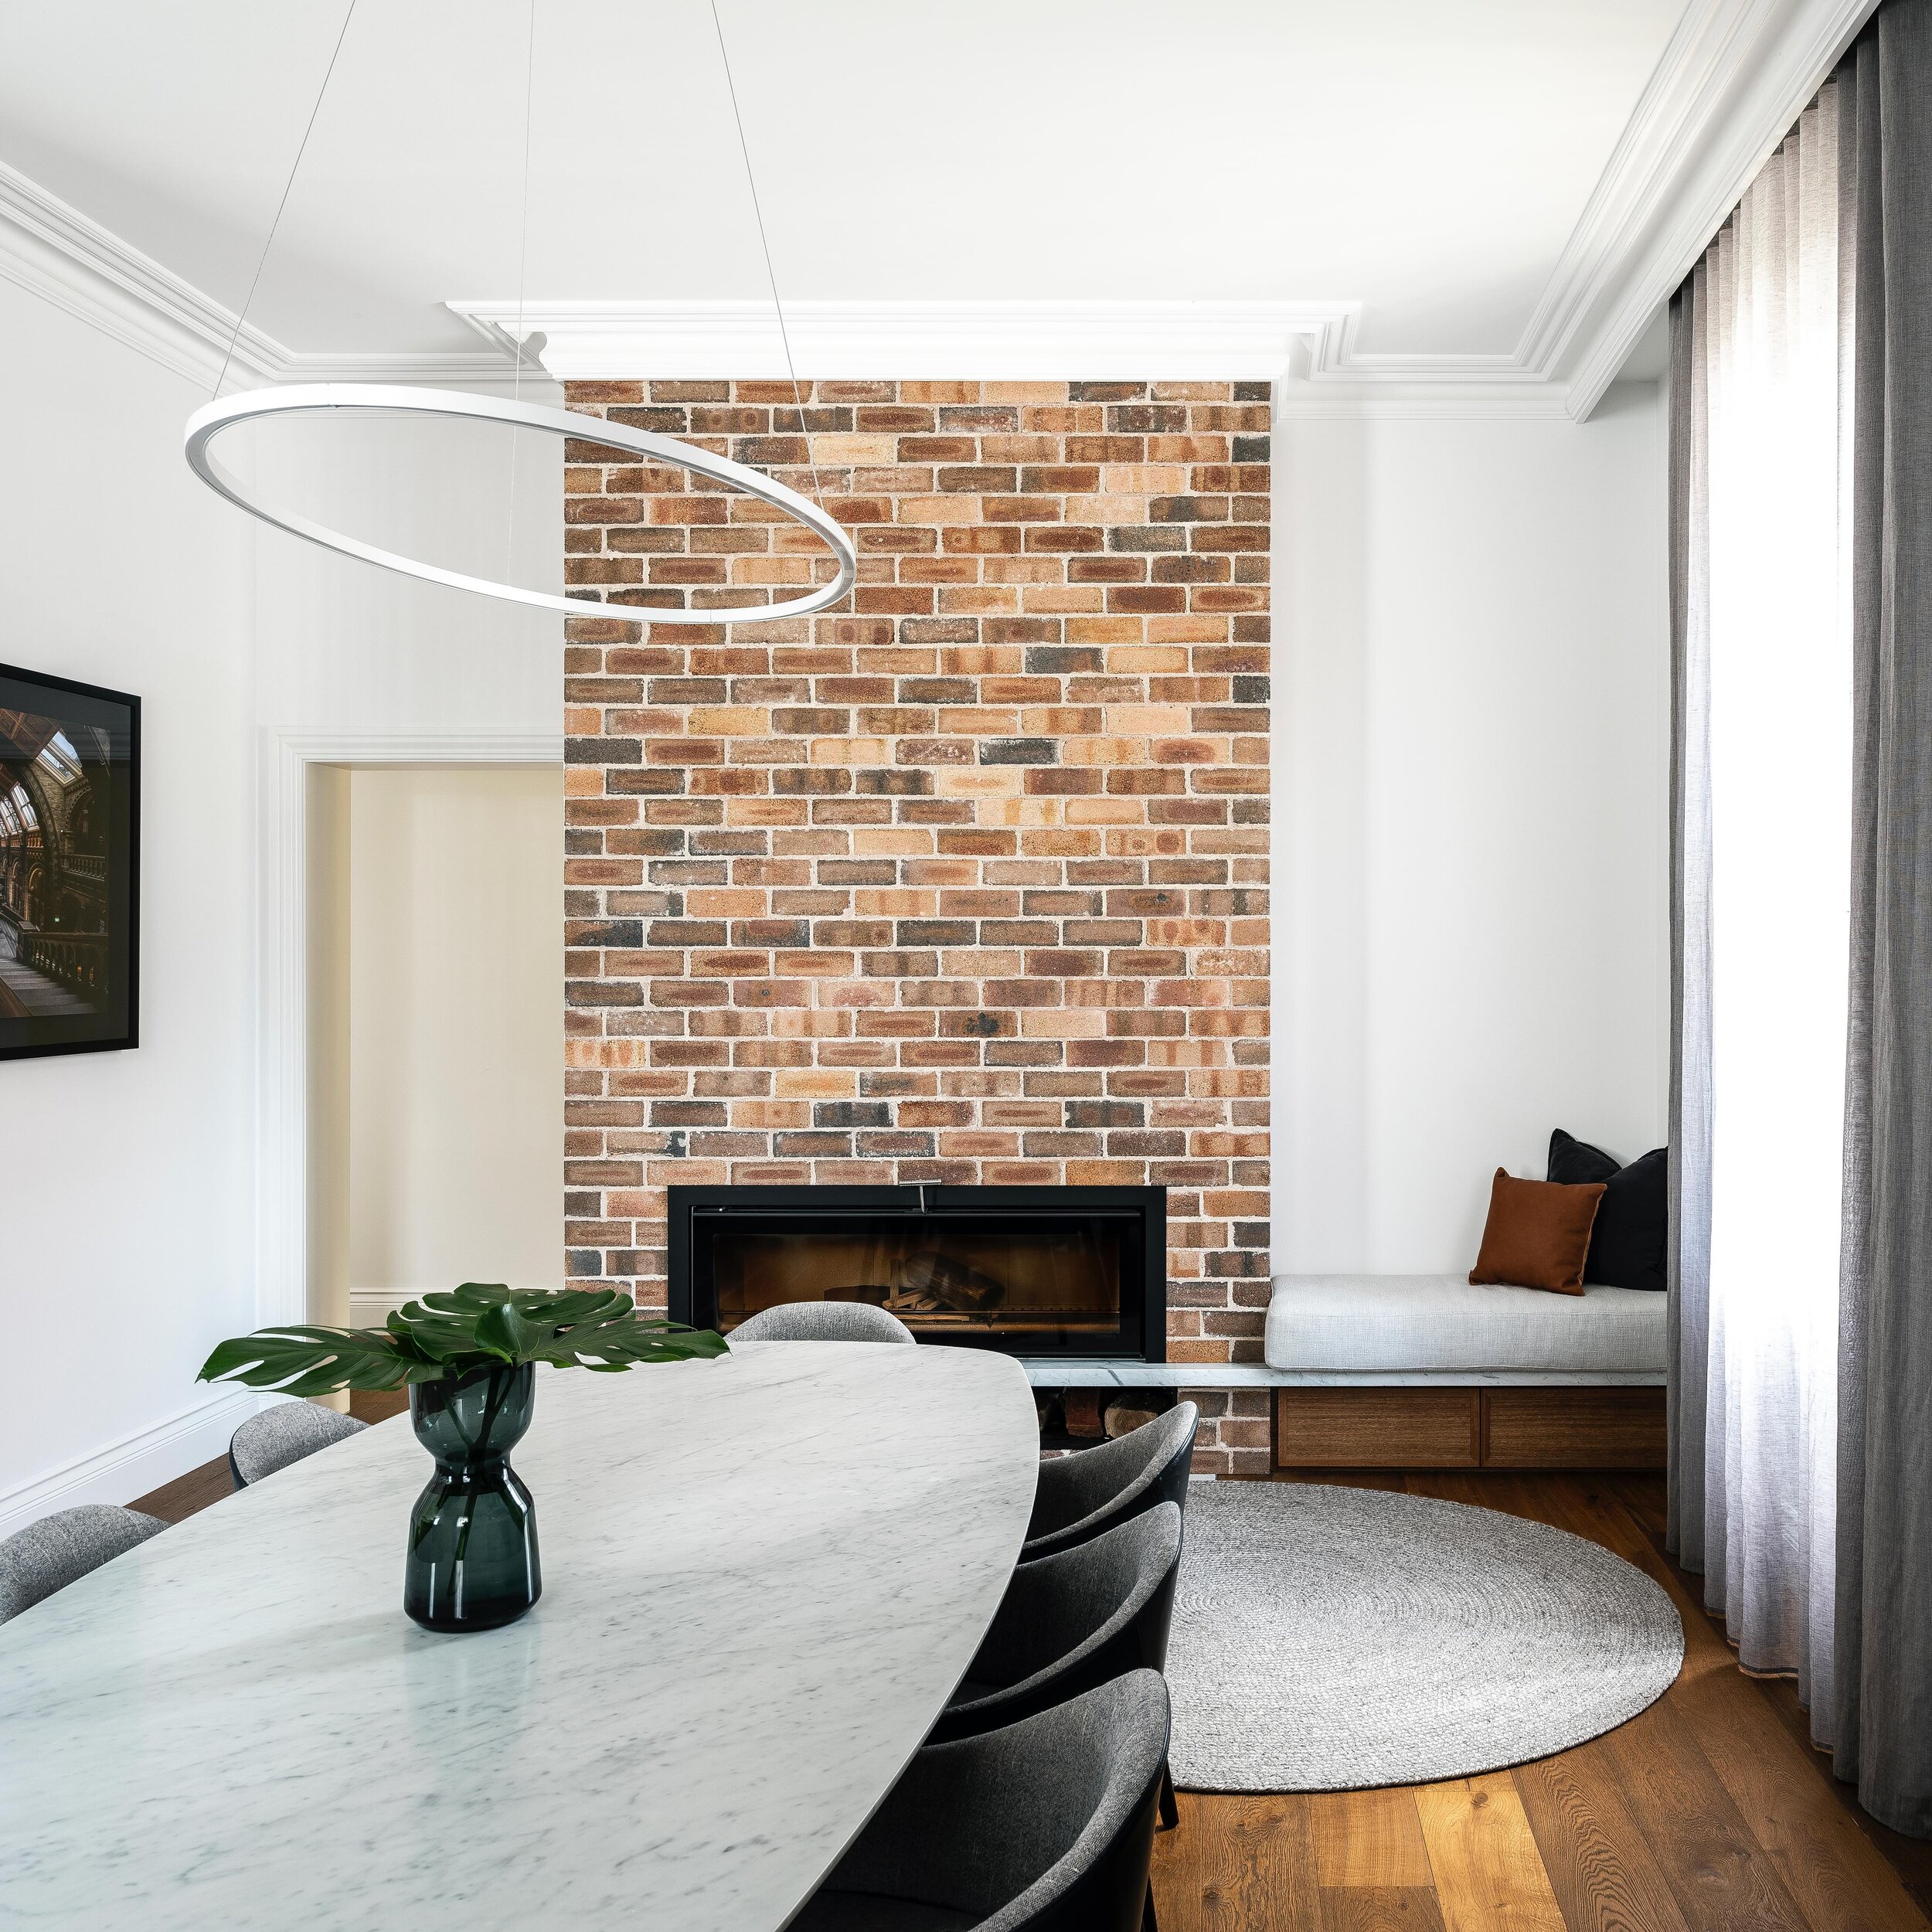 RILEY &bull; Matching the original brick was a must for the secondary fireplace within this warm living dining space. An upholstered bench seat was the perfect was to make this dining space feel conversational and flexible #InnovateInteriors